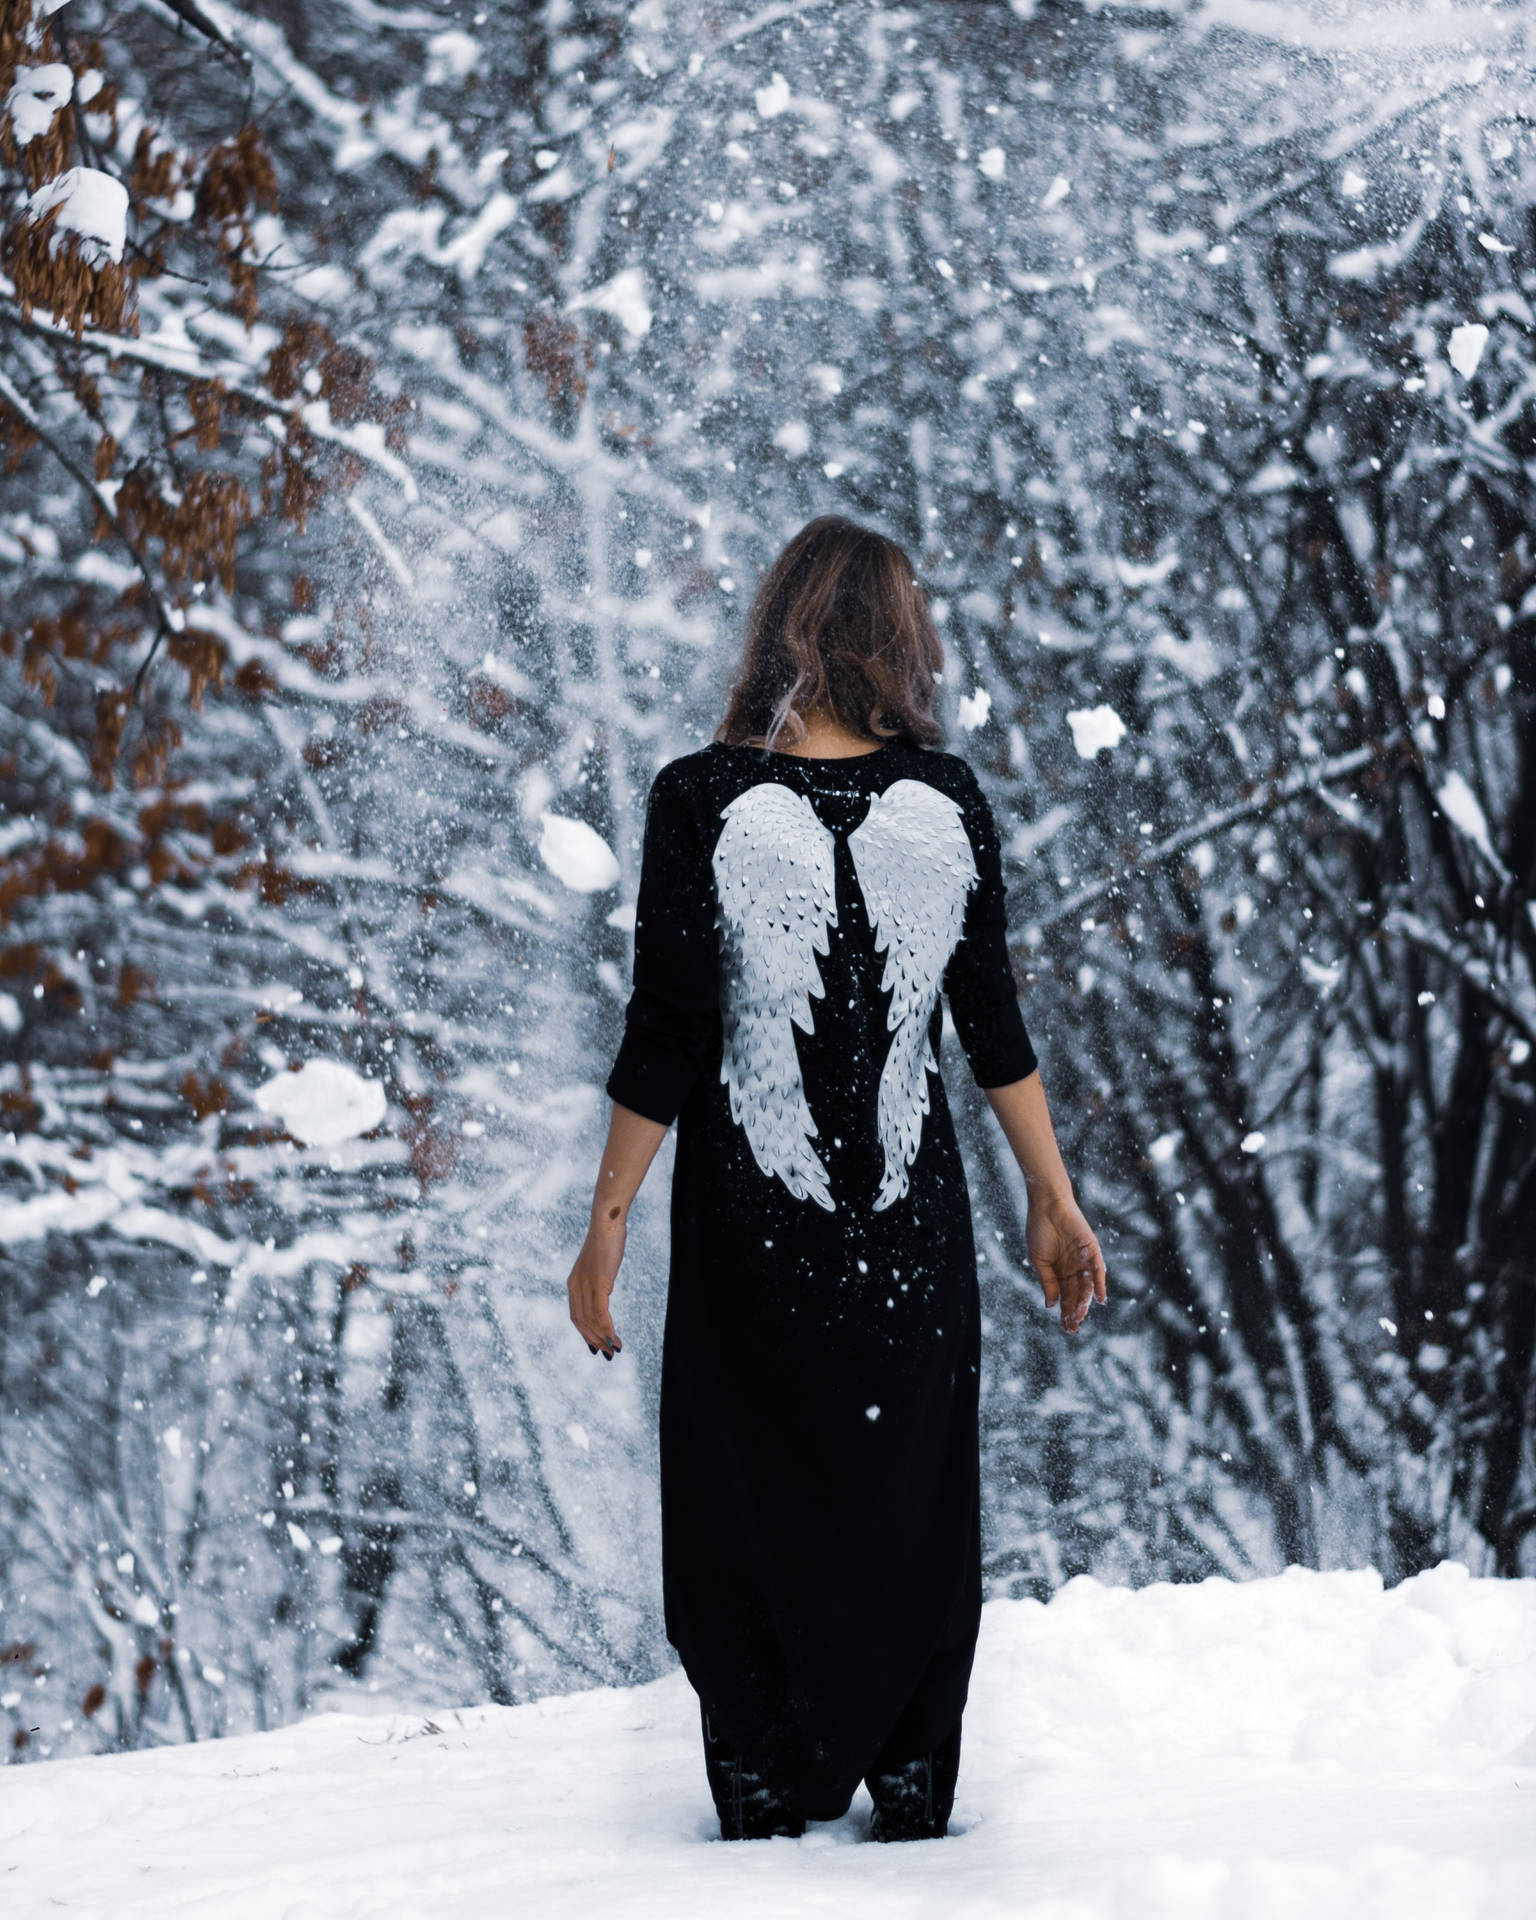 Angel Girl In Snow Background